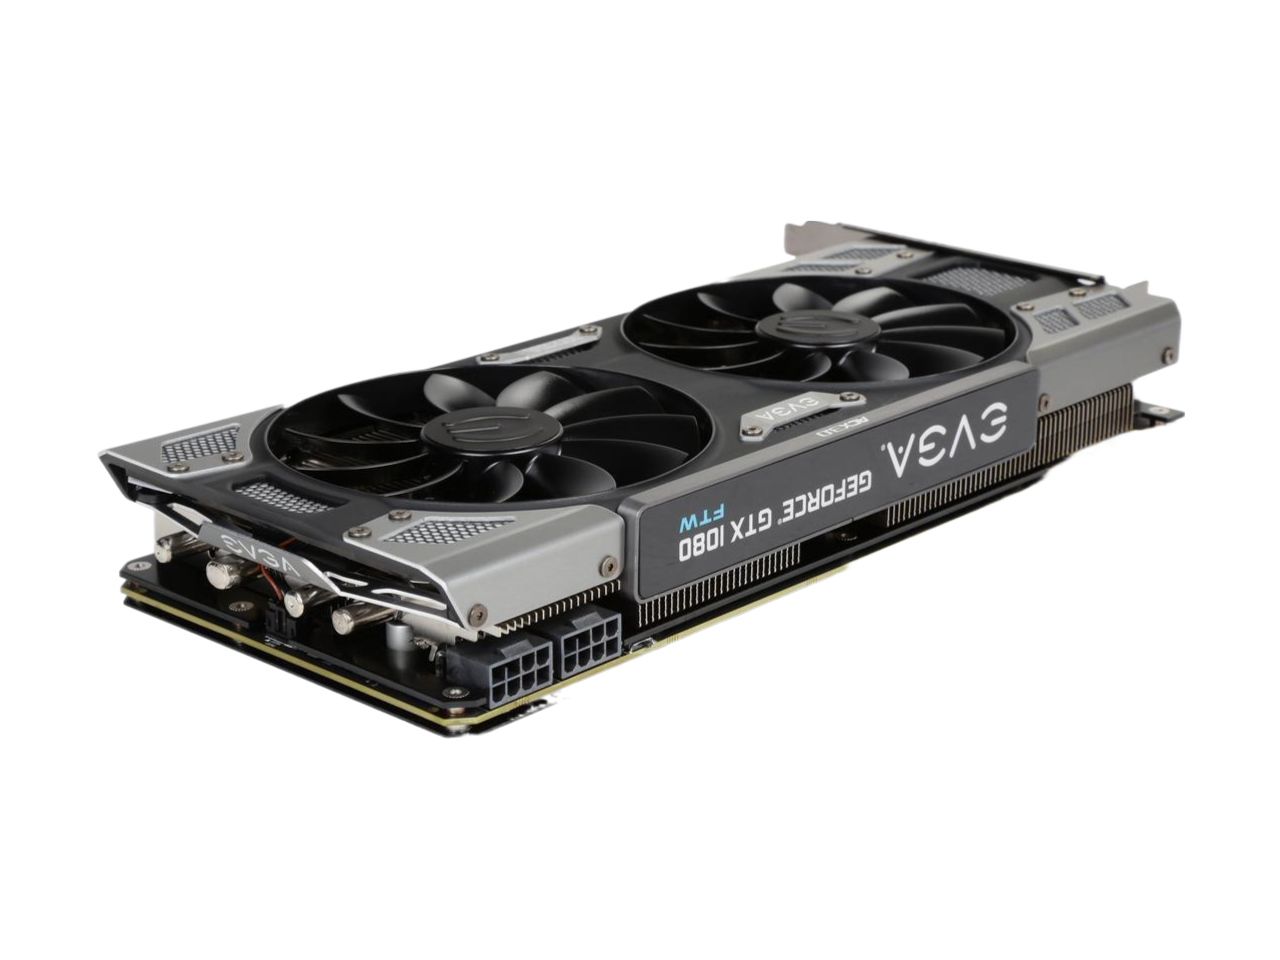 EVGA GeForce GTX 1080 FTW GAMING ACX 3.0 8GB GDDR5X RGB LED 10CM FAN 10 Power Phases Double BIOS DX12 OSD Support PXOC Video Graphics Card 08G-P4-6286-KR